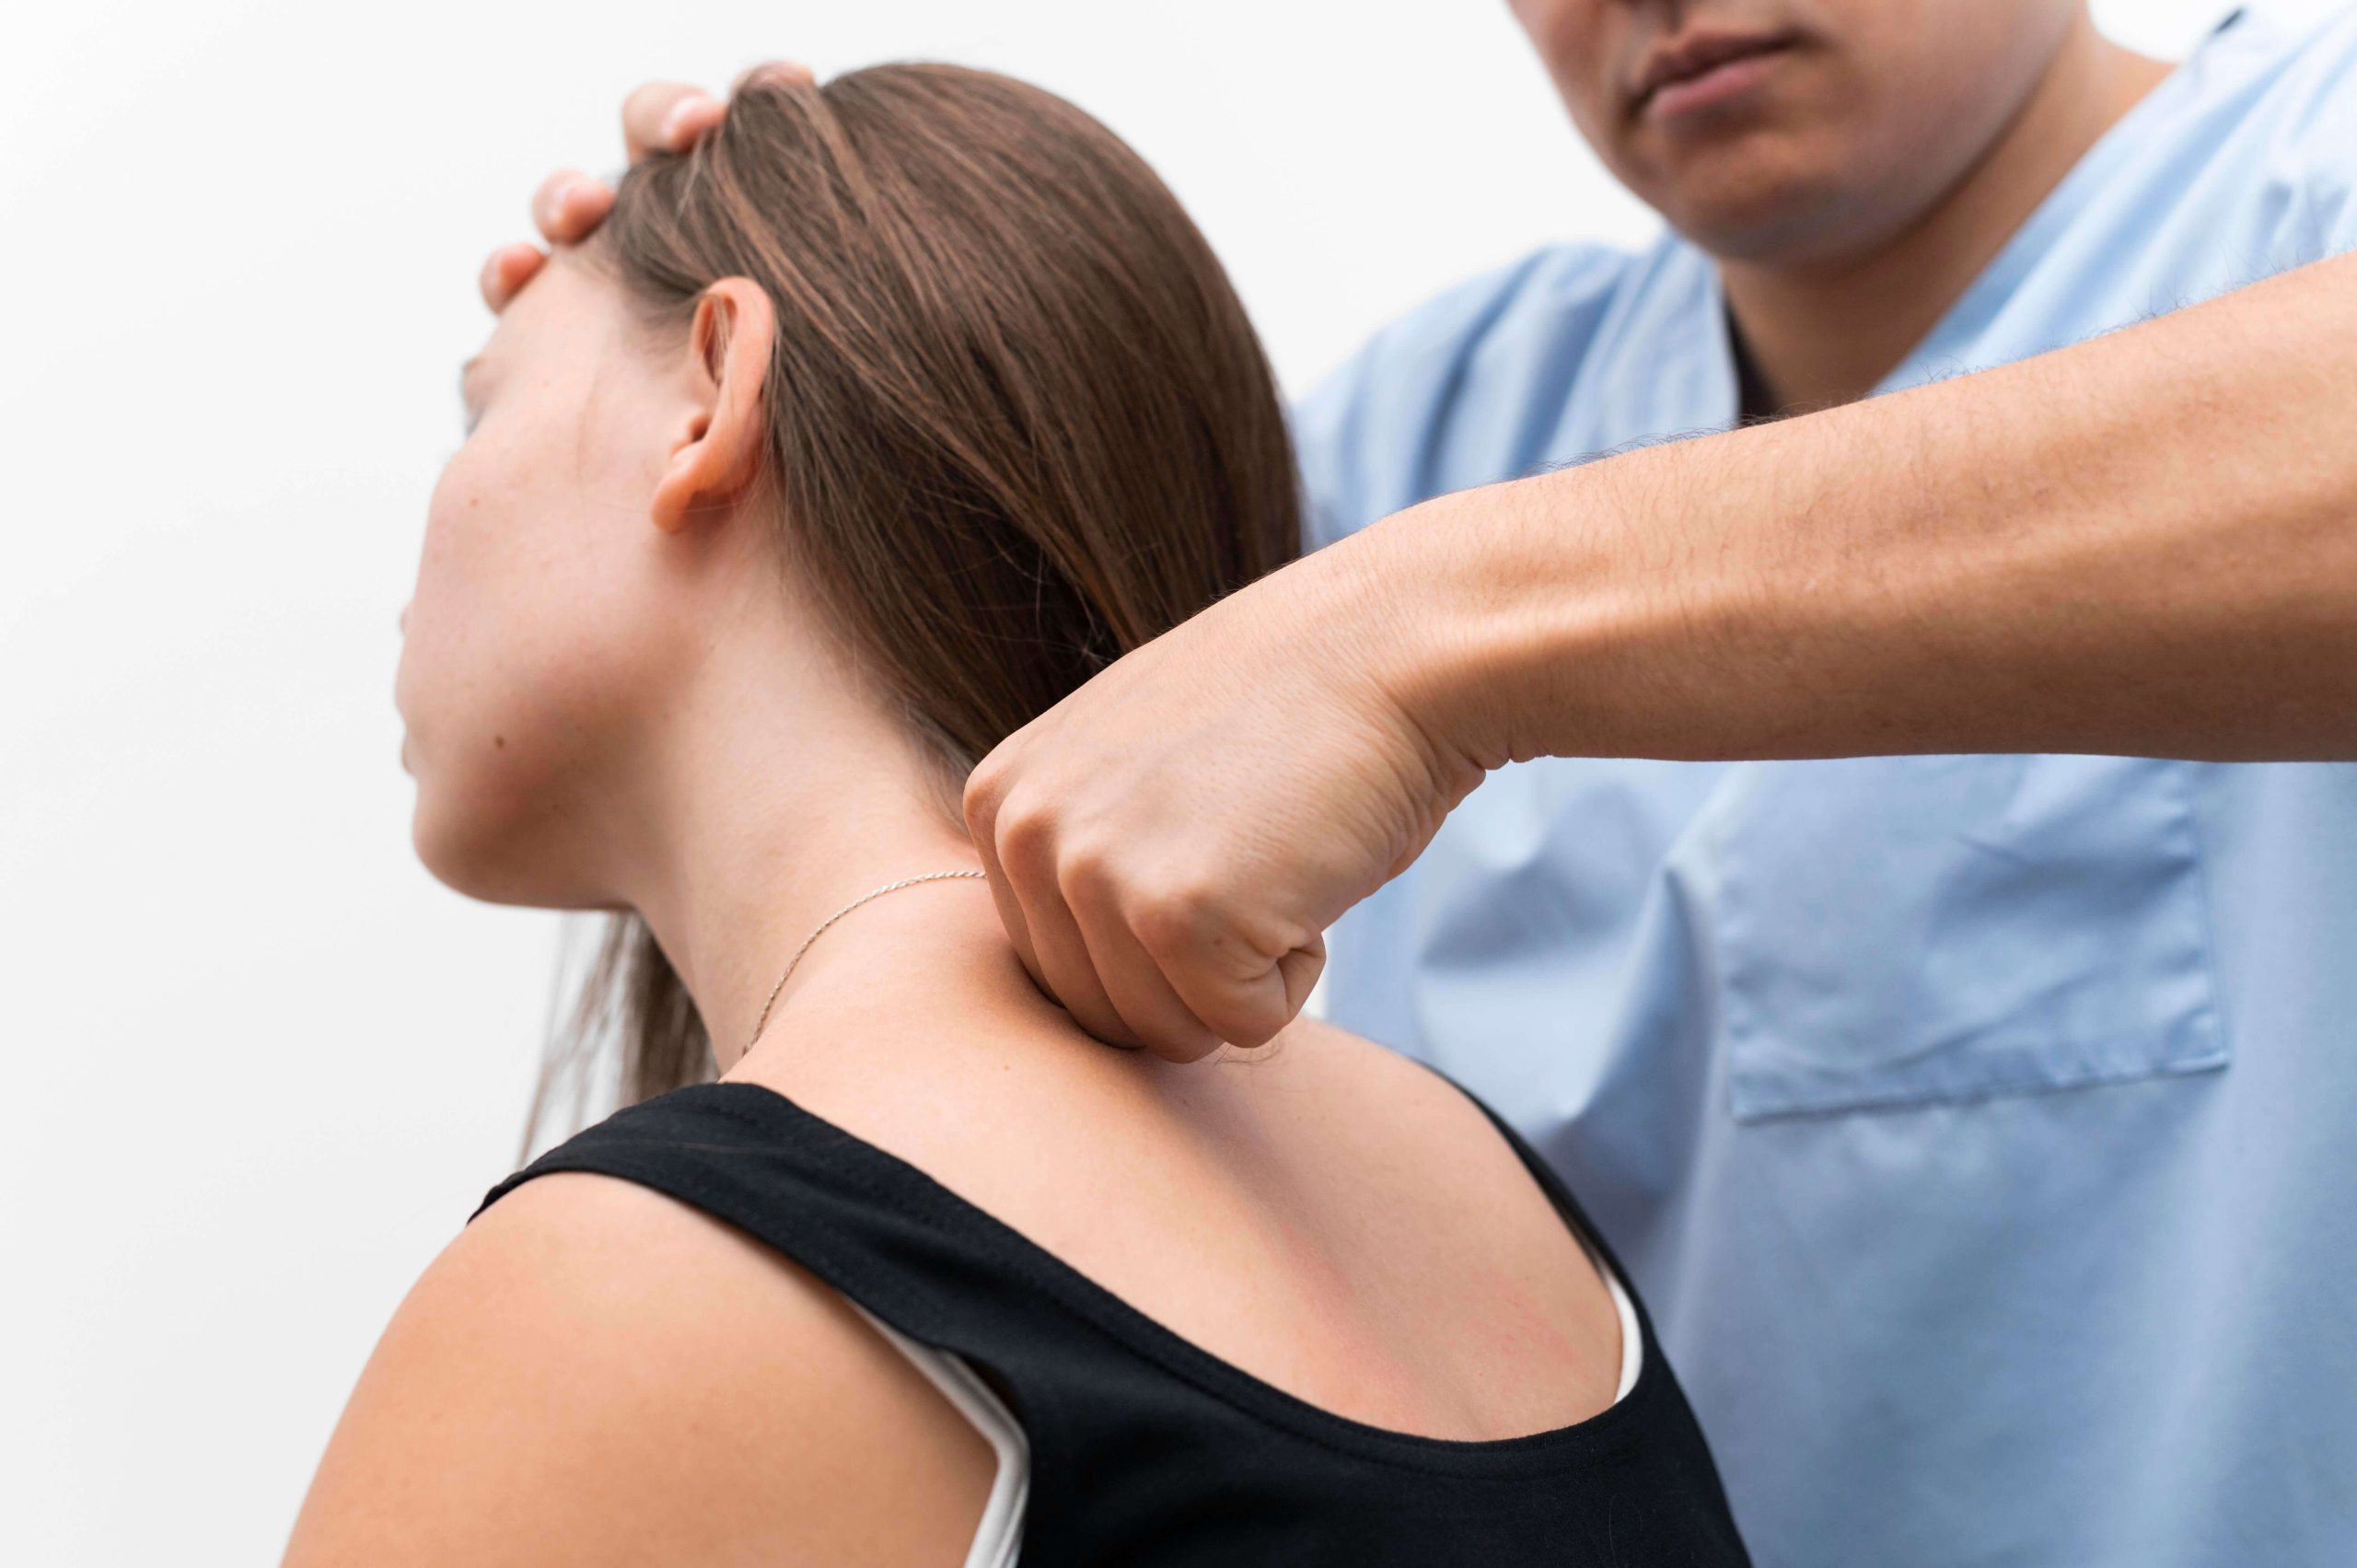 A chiropractor relieves back pain for a patient